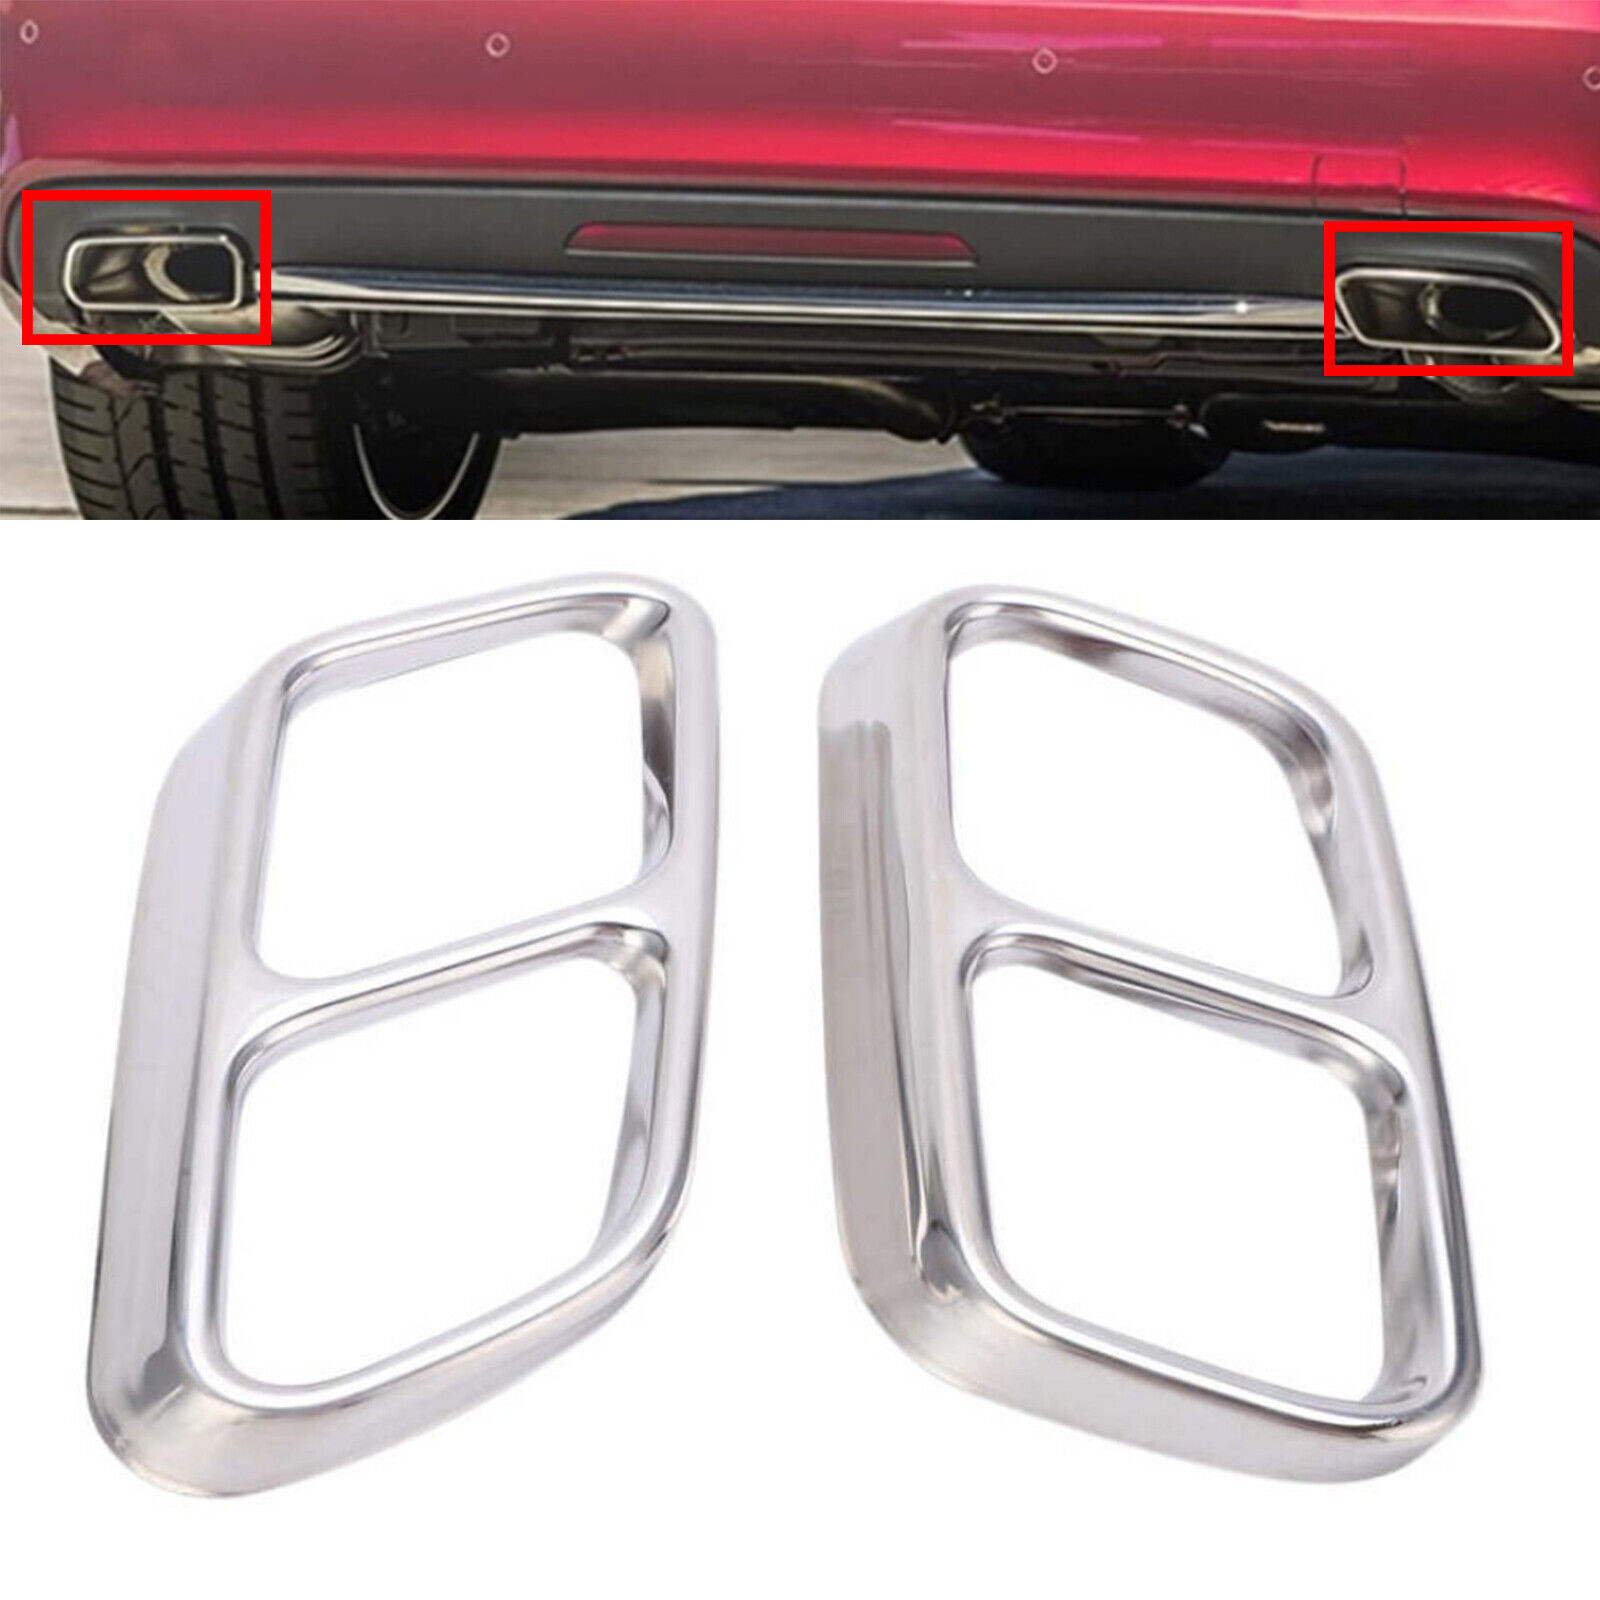 2pcs Gloss Silver Stainless Exhaust Muffler Tip Cover Fits 10-13 W212 E350 E550